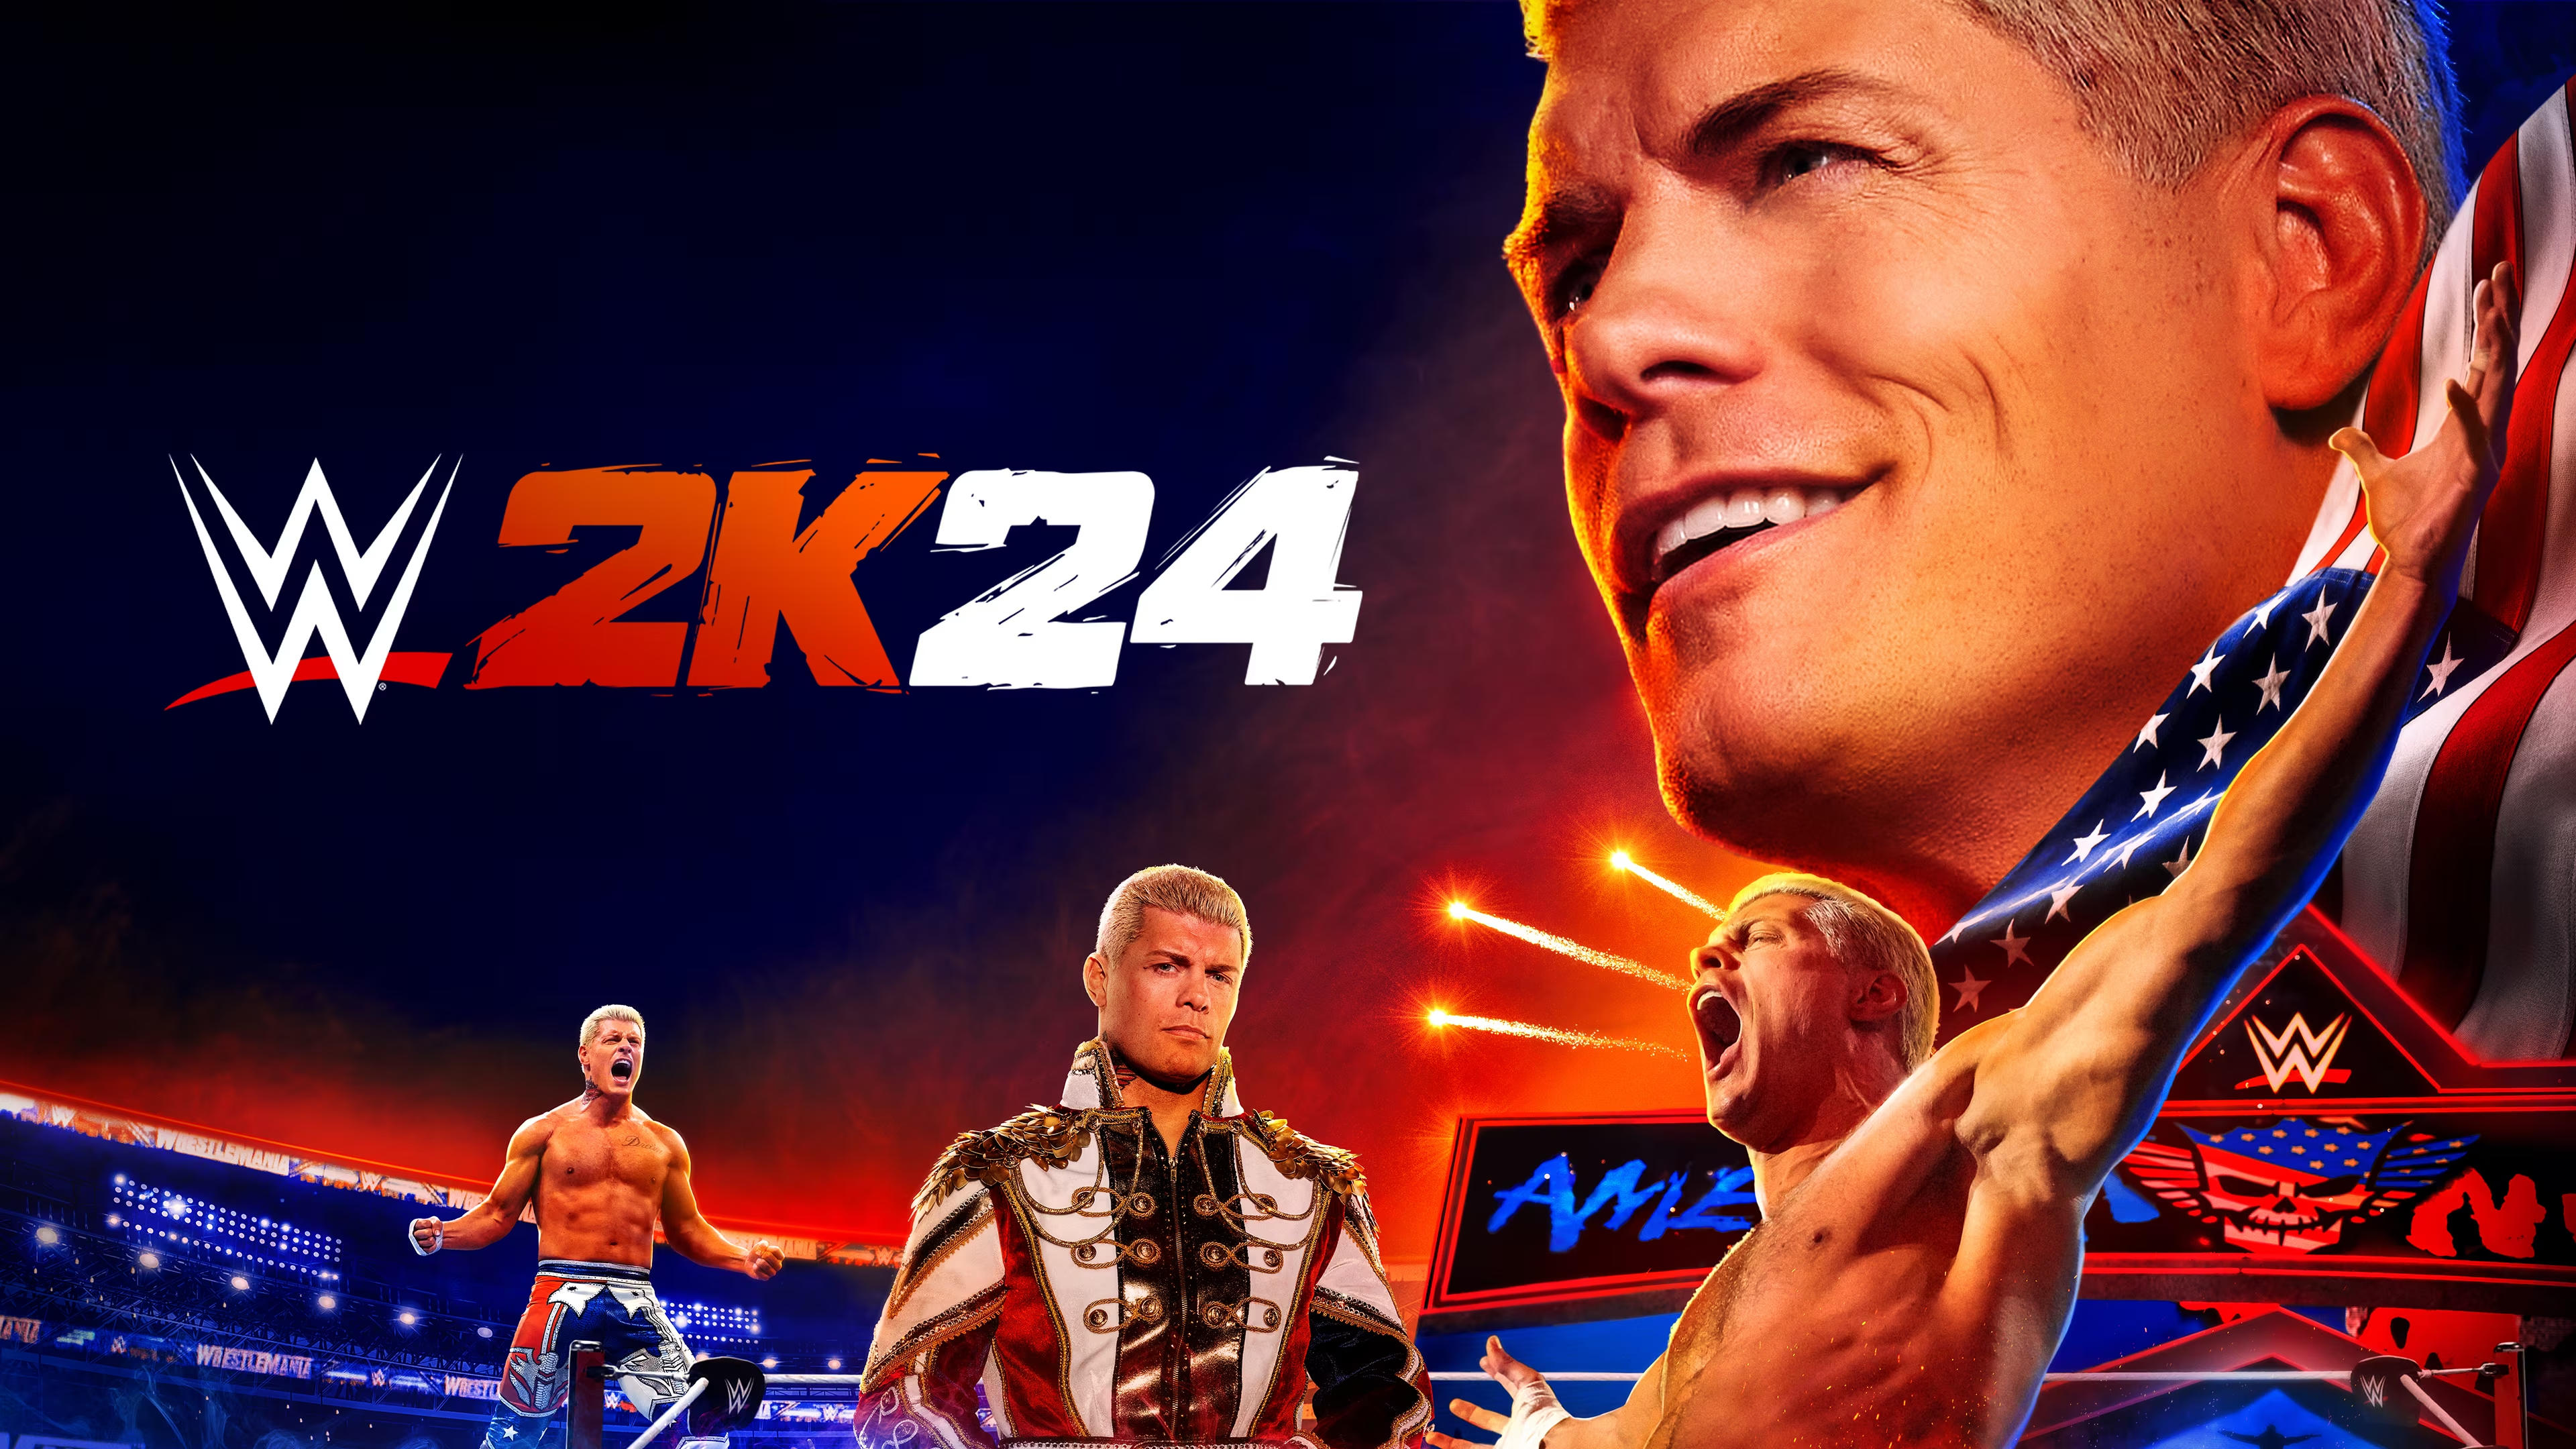 [Review] WWE 2K24